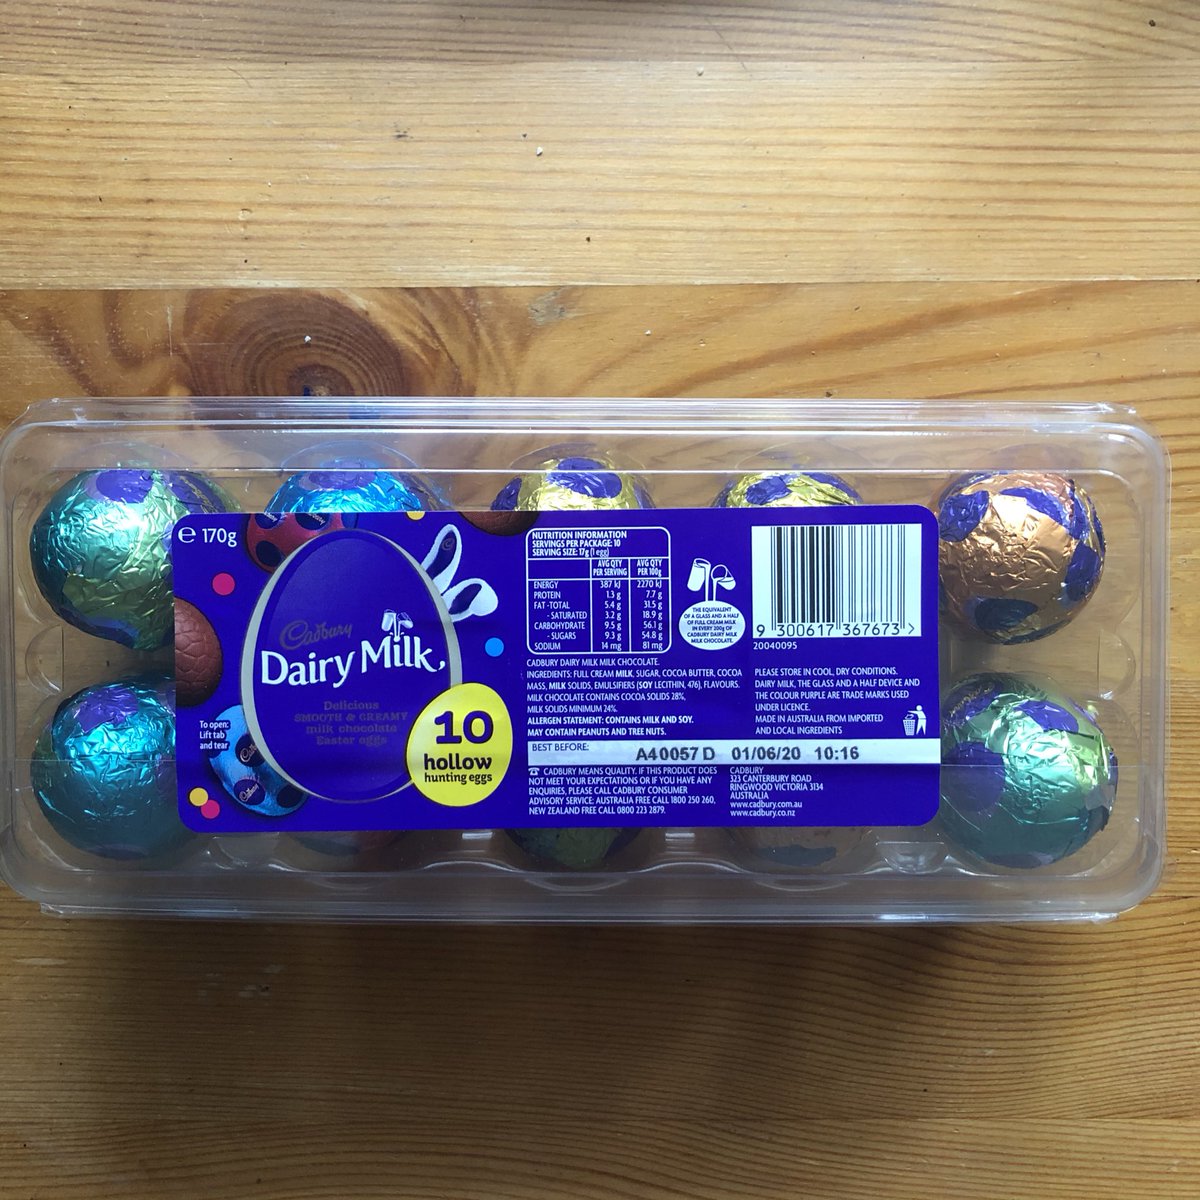 Cadbury Hunting Eggs- I like putting the entire egg into my mouth like I am a snake. I will take no follow up questions.